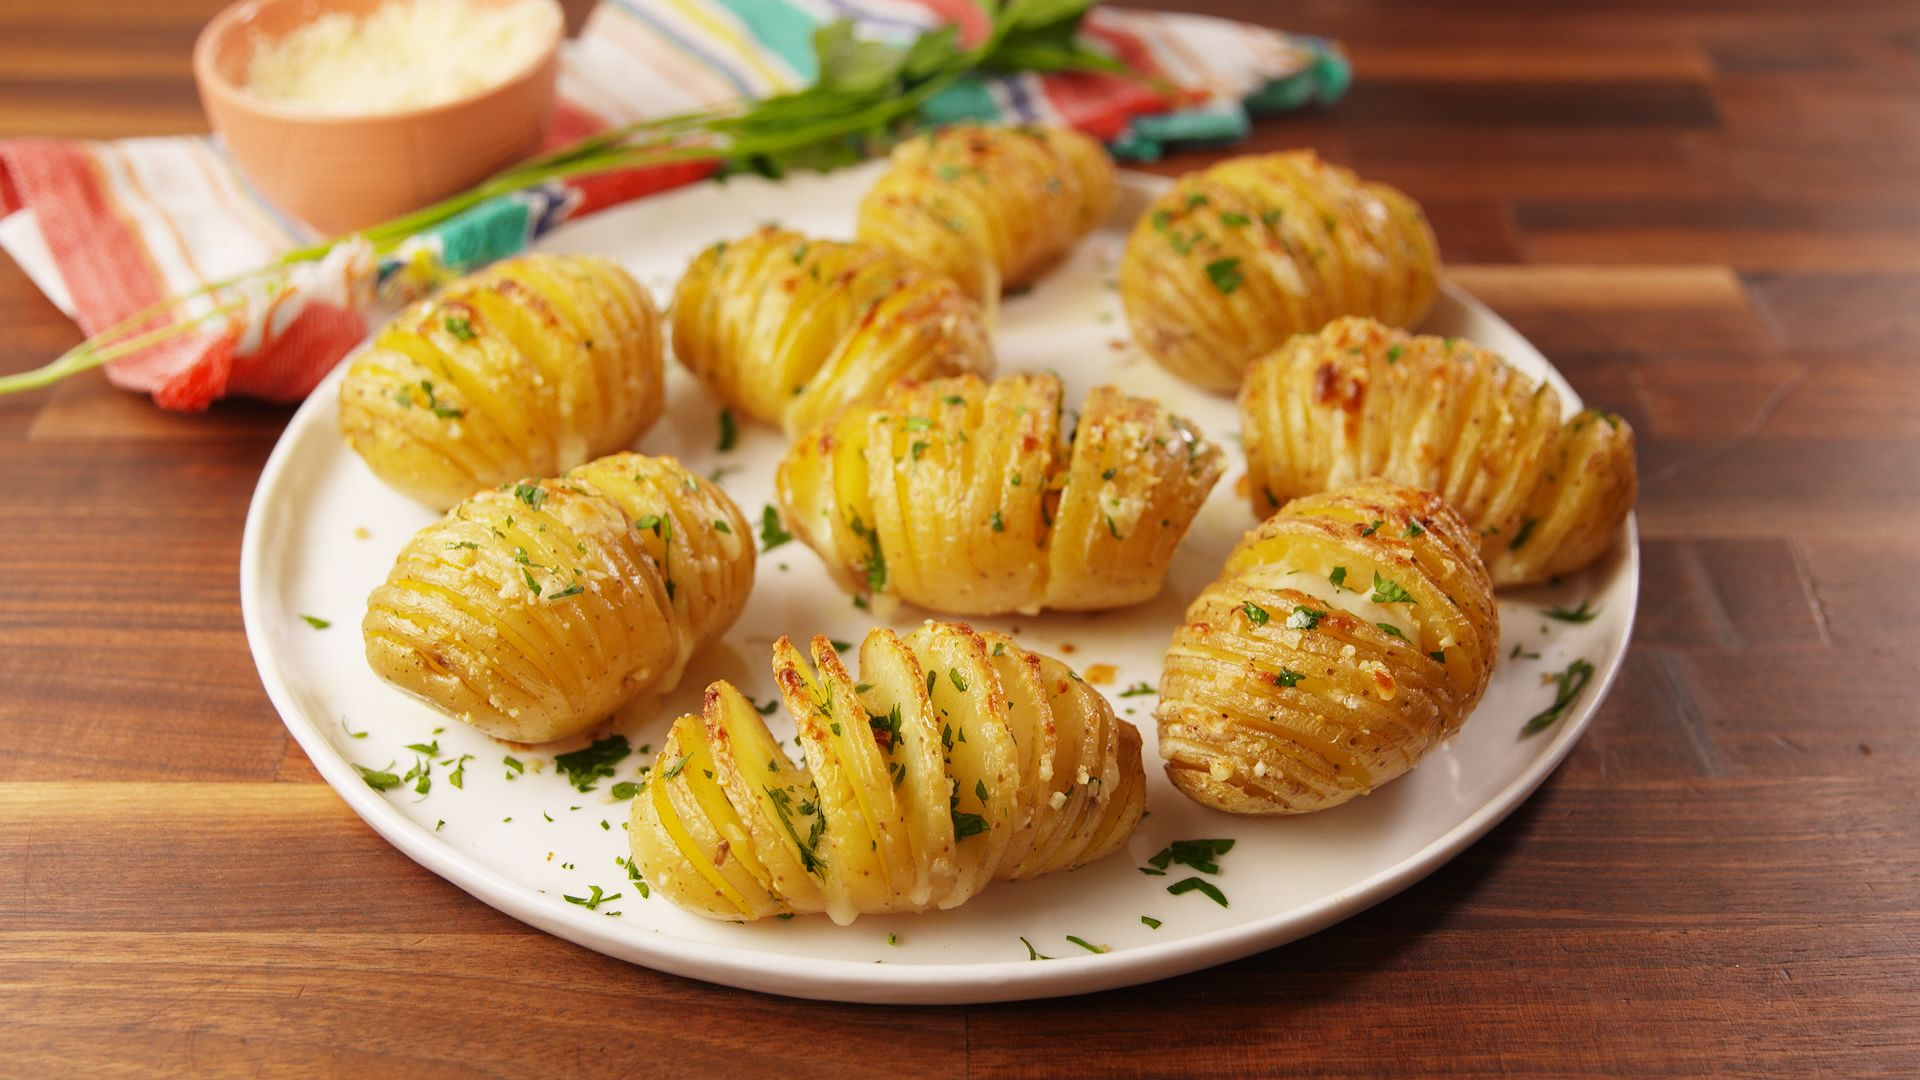 Best Cheesy Garlic Butter Potatoes Recipe - How to Make ... image